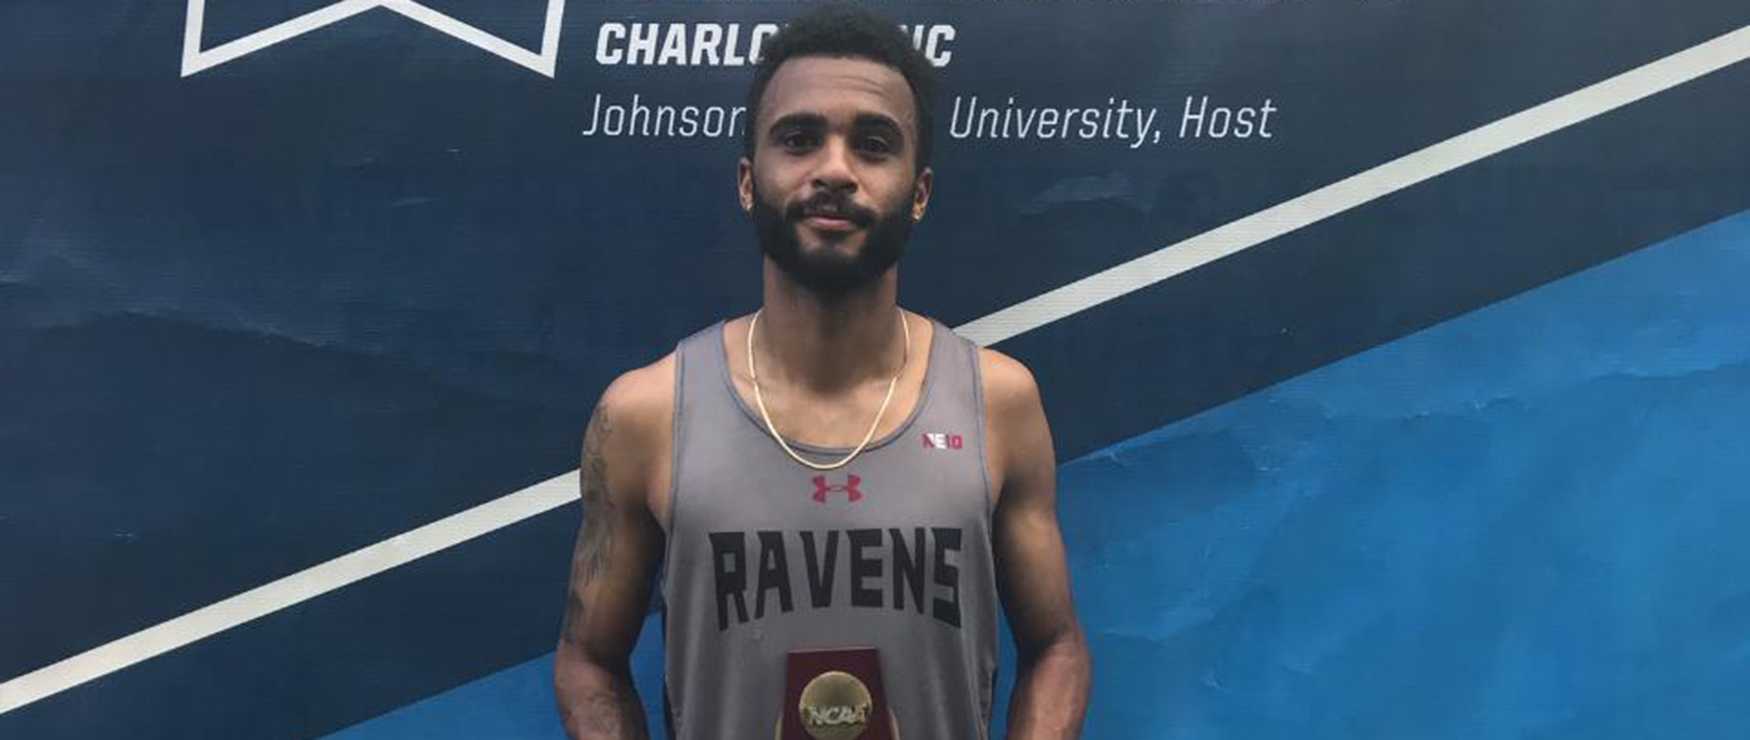 Men’s Track & Field’s Minors Caps Career with Fifth-Place Finish in 800m at NCAA Championships